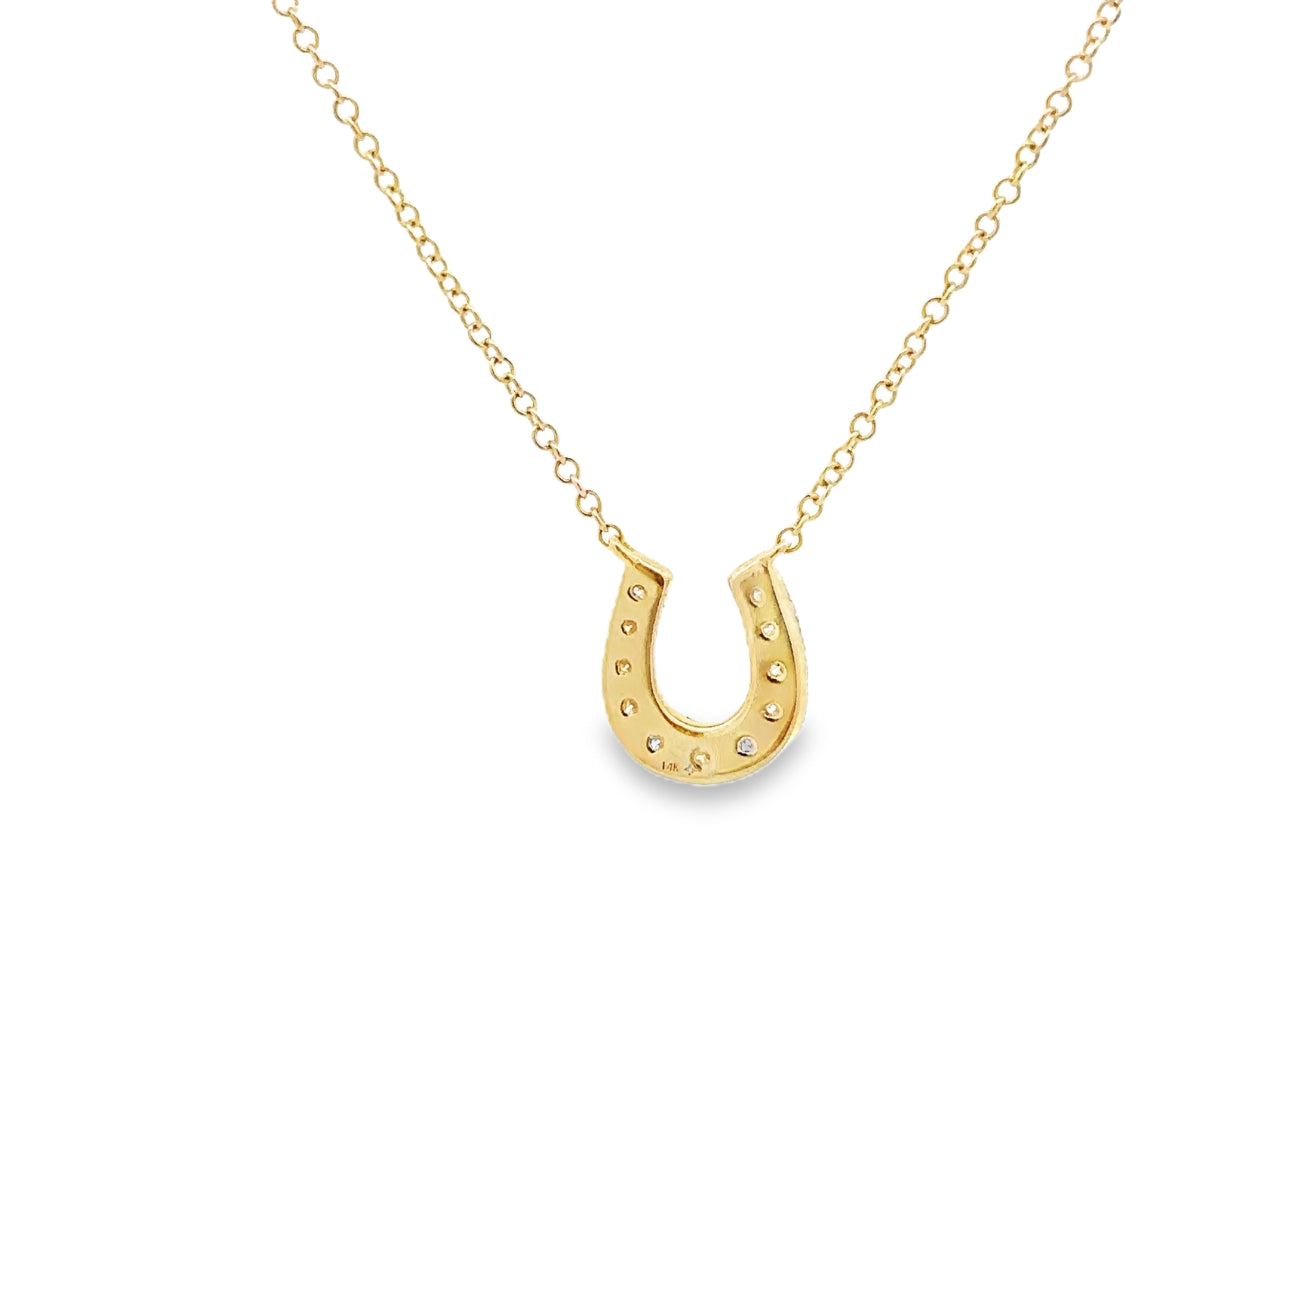 WD1636 14kt Gold Horseshoe Necklace with Pave Diamonds